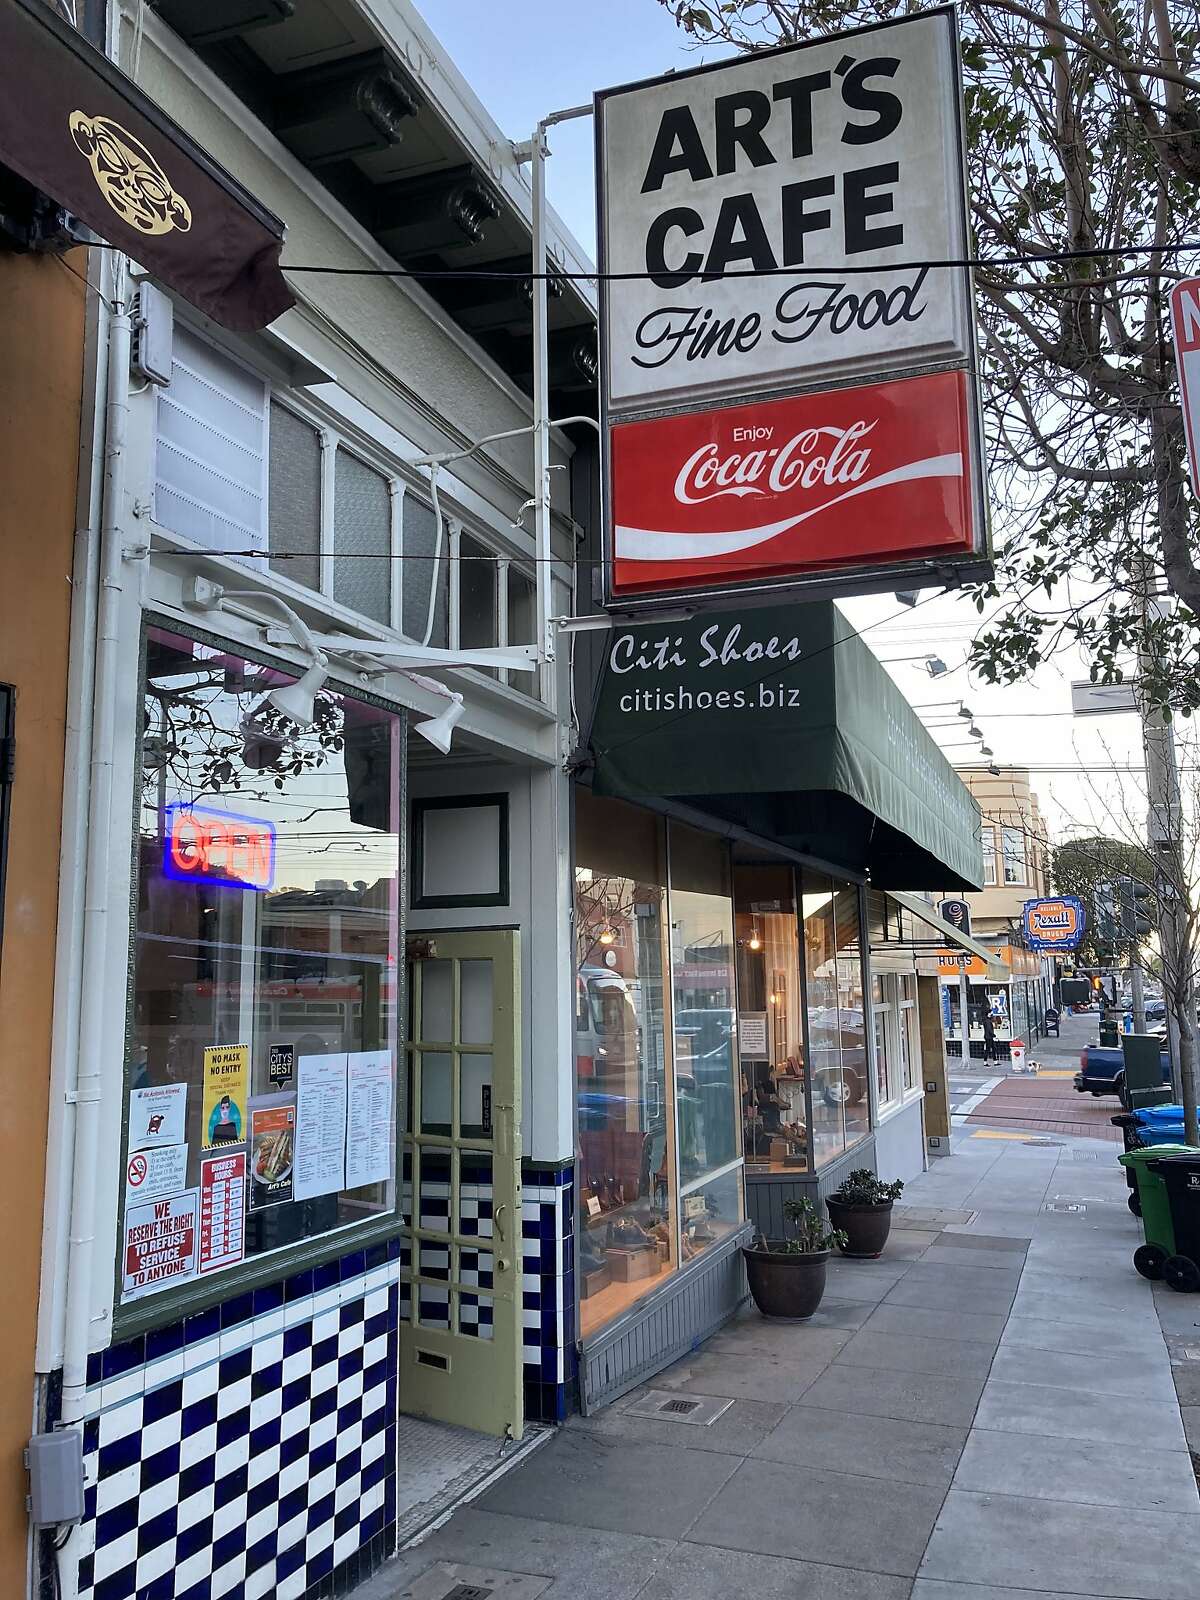 Art’s Cafe, a beloved 31-year-old Inner Sunset diner that closed in July when its owners retired, reopened Friday even after fans thought its cozy narrow counter and hash brown sandwiches were gone forever.